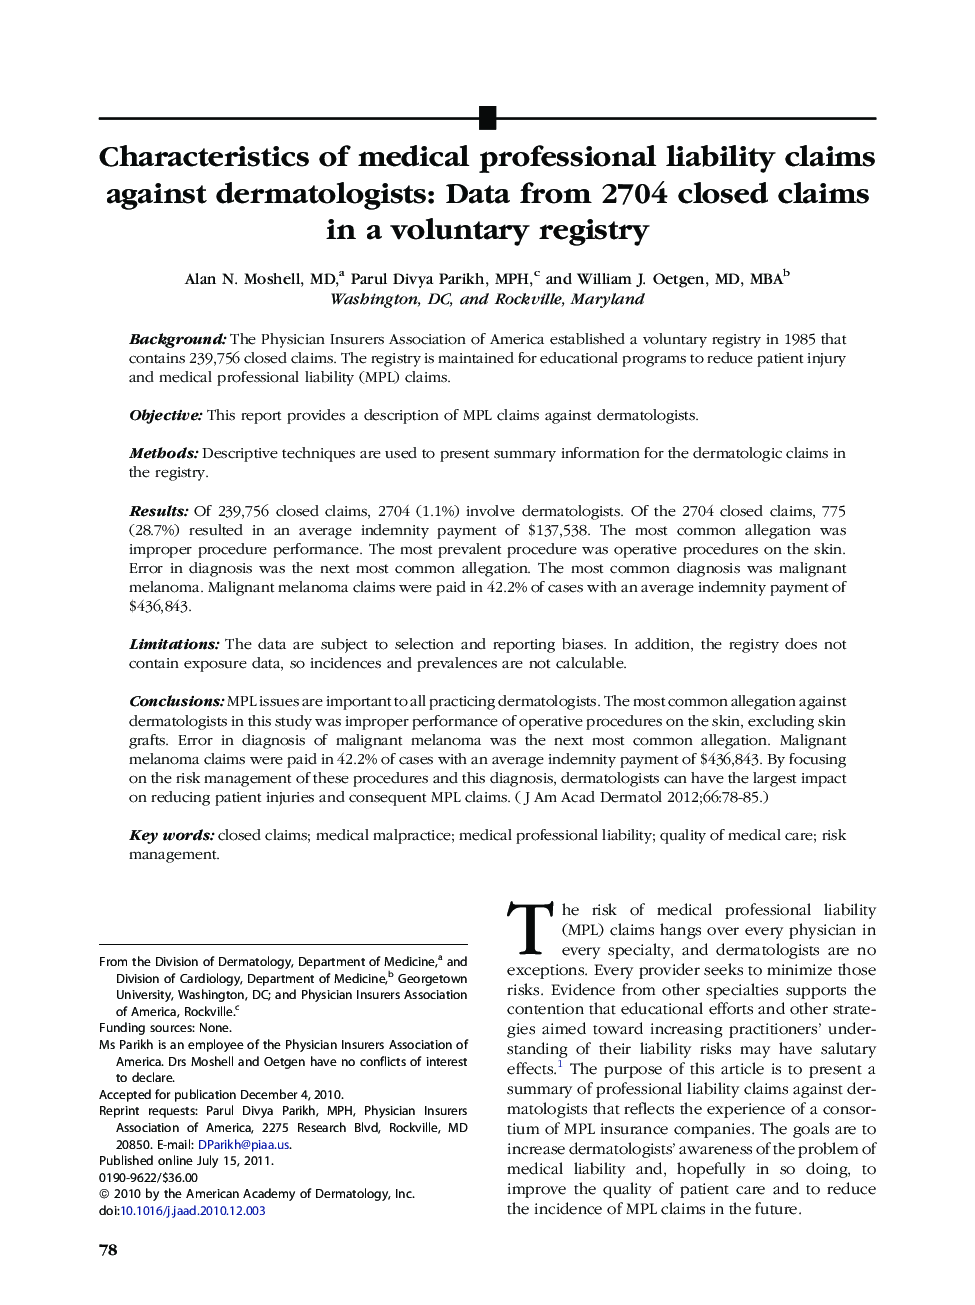 Characteristics of medical professional liability claims against dermatologists: Data from 2704 closed claims in a voluntary registry 